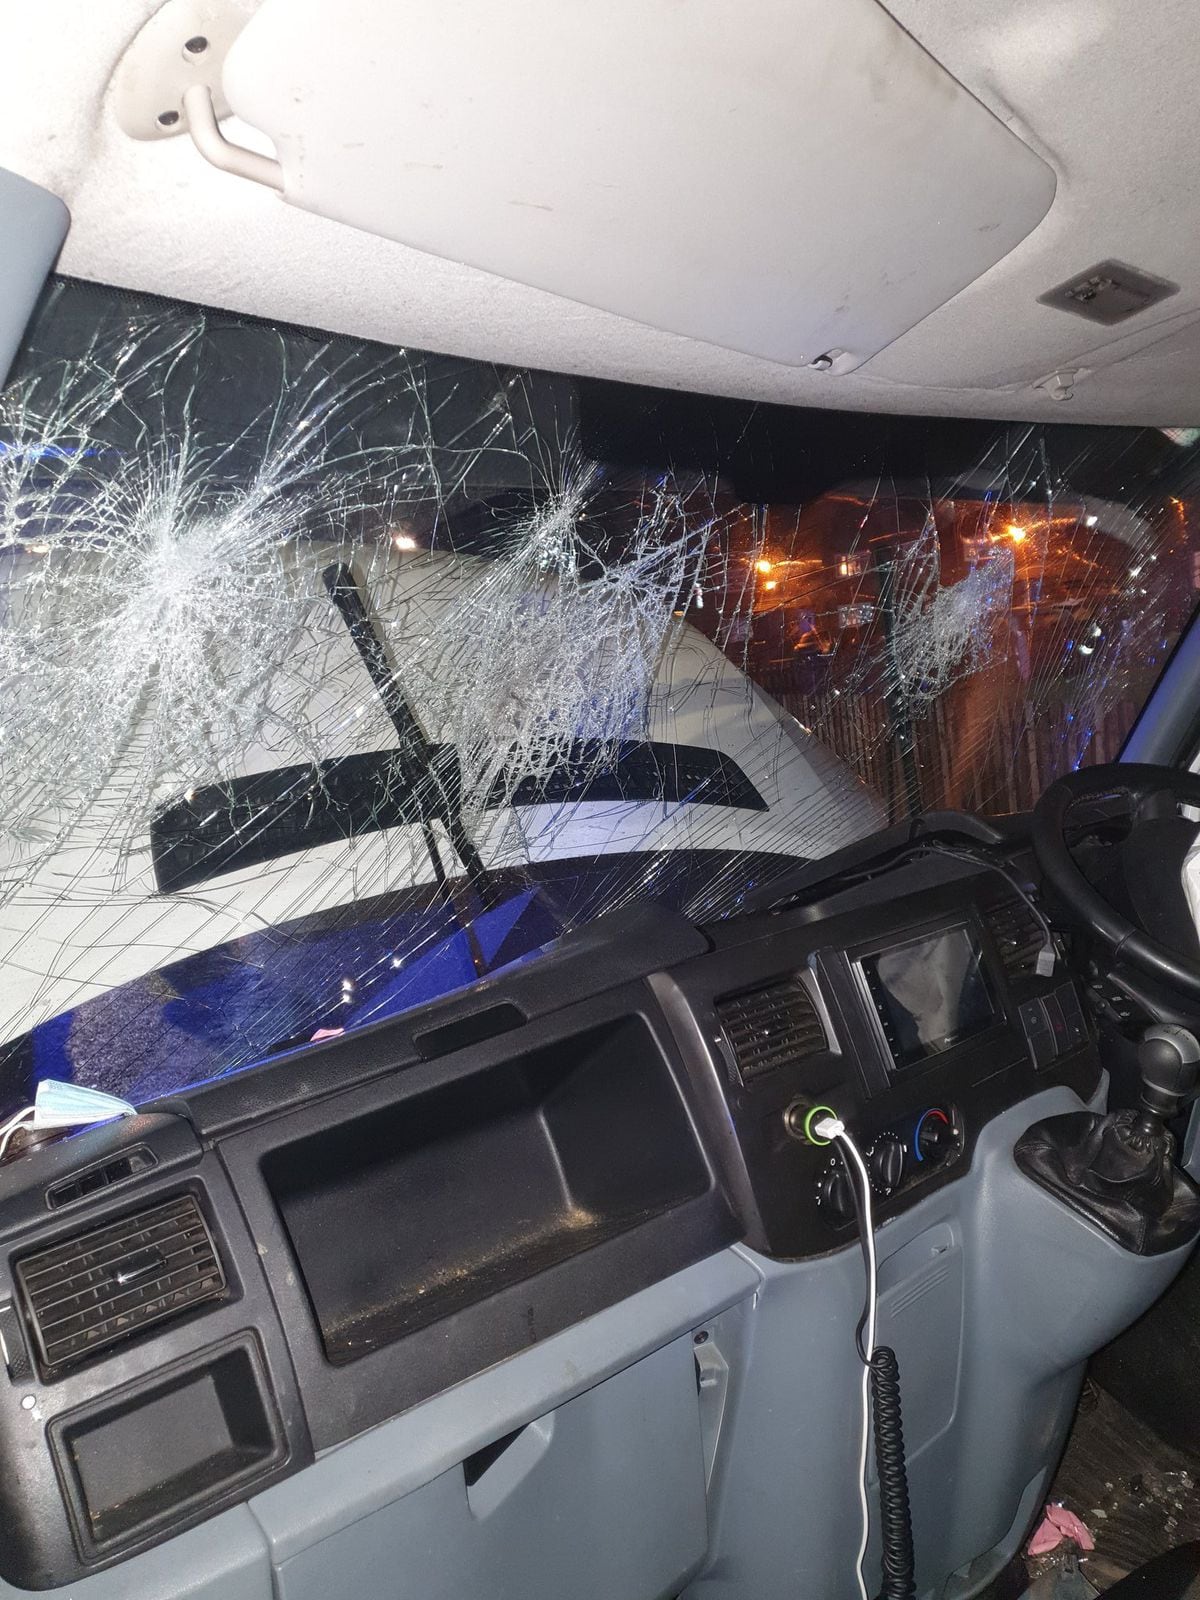 Damage caused by passengers who were not wearing seatbelts